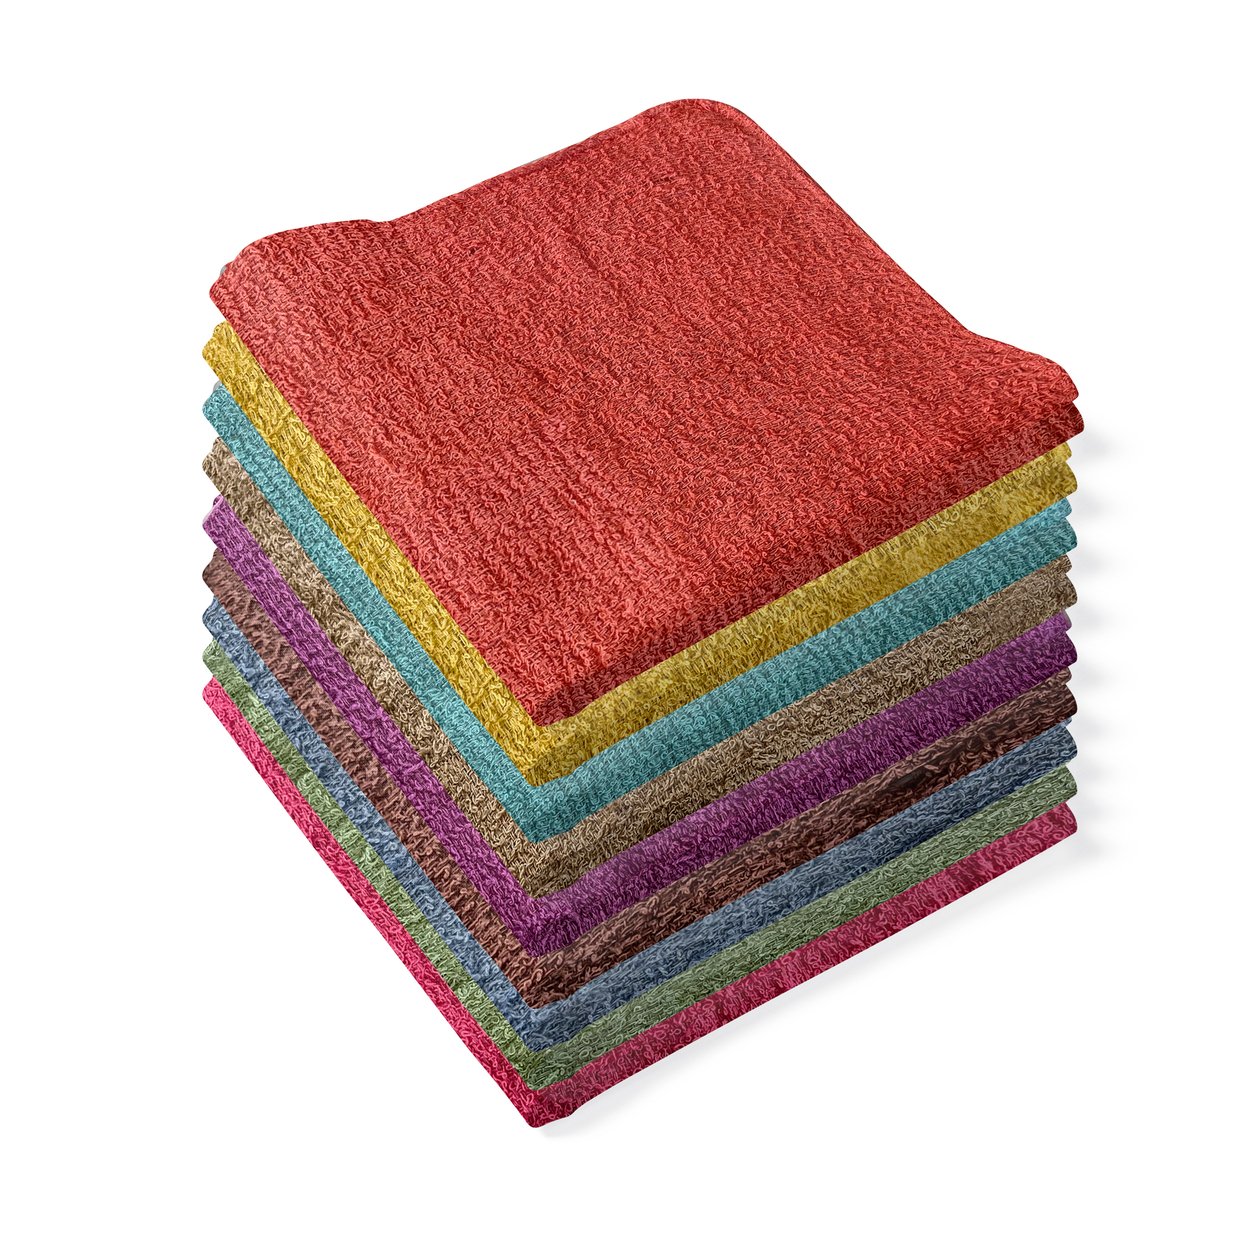 Bargain Hunters 3-Pack: 100% Ultra-Soft Absorbent Cotton Multipurpose Cleaning Wash Cloths